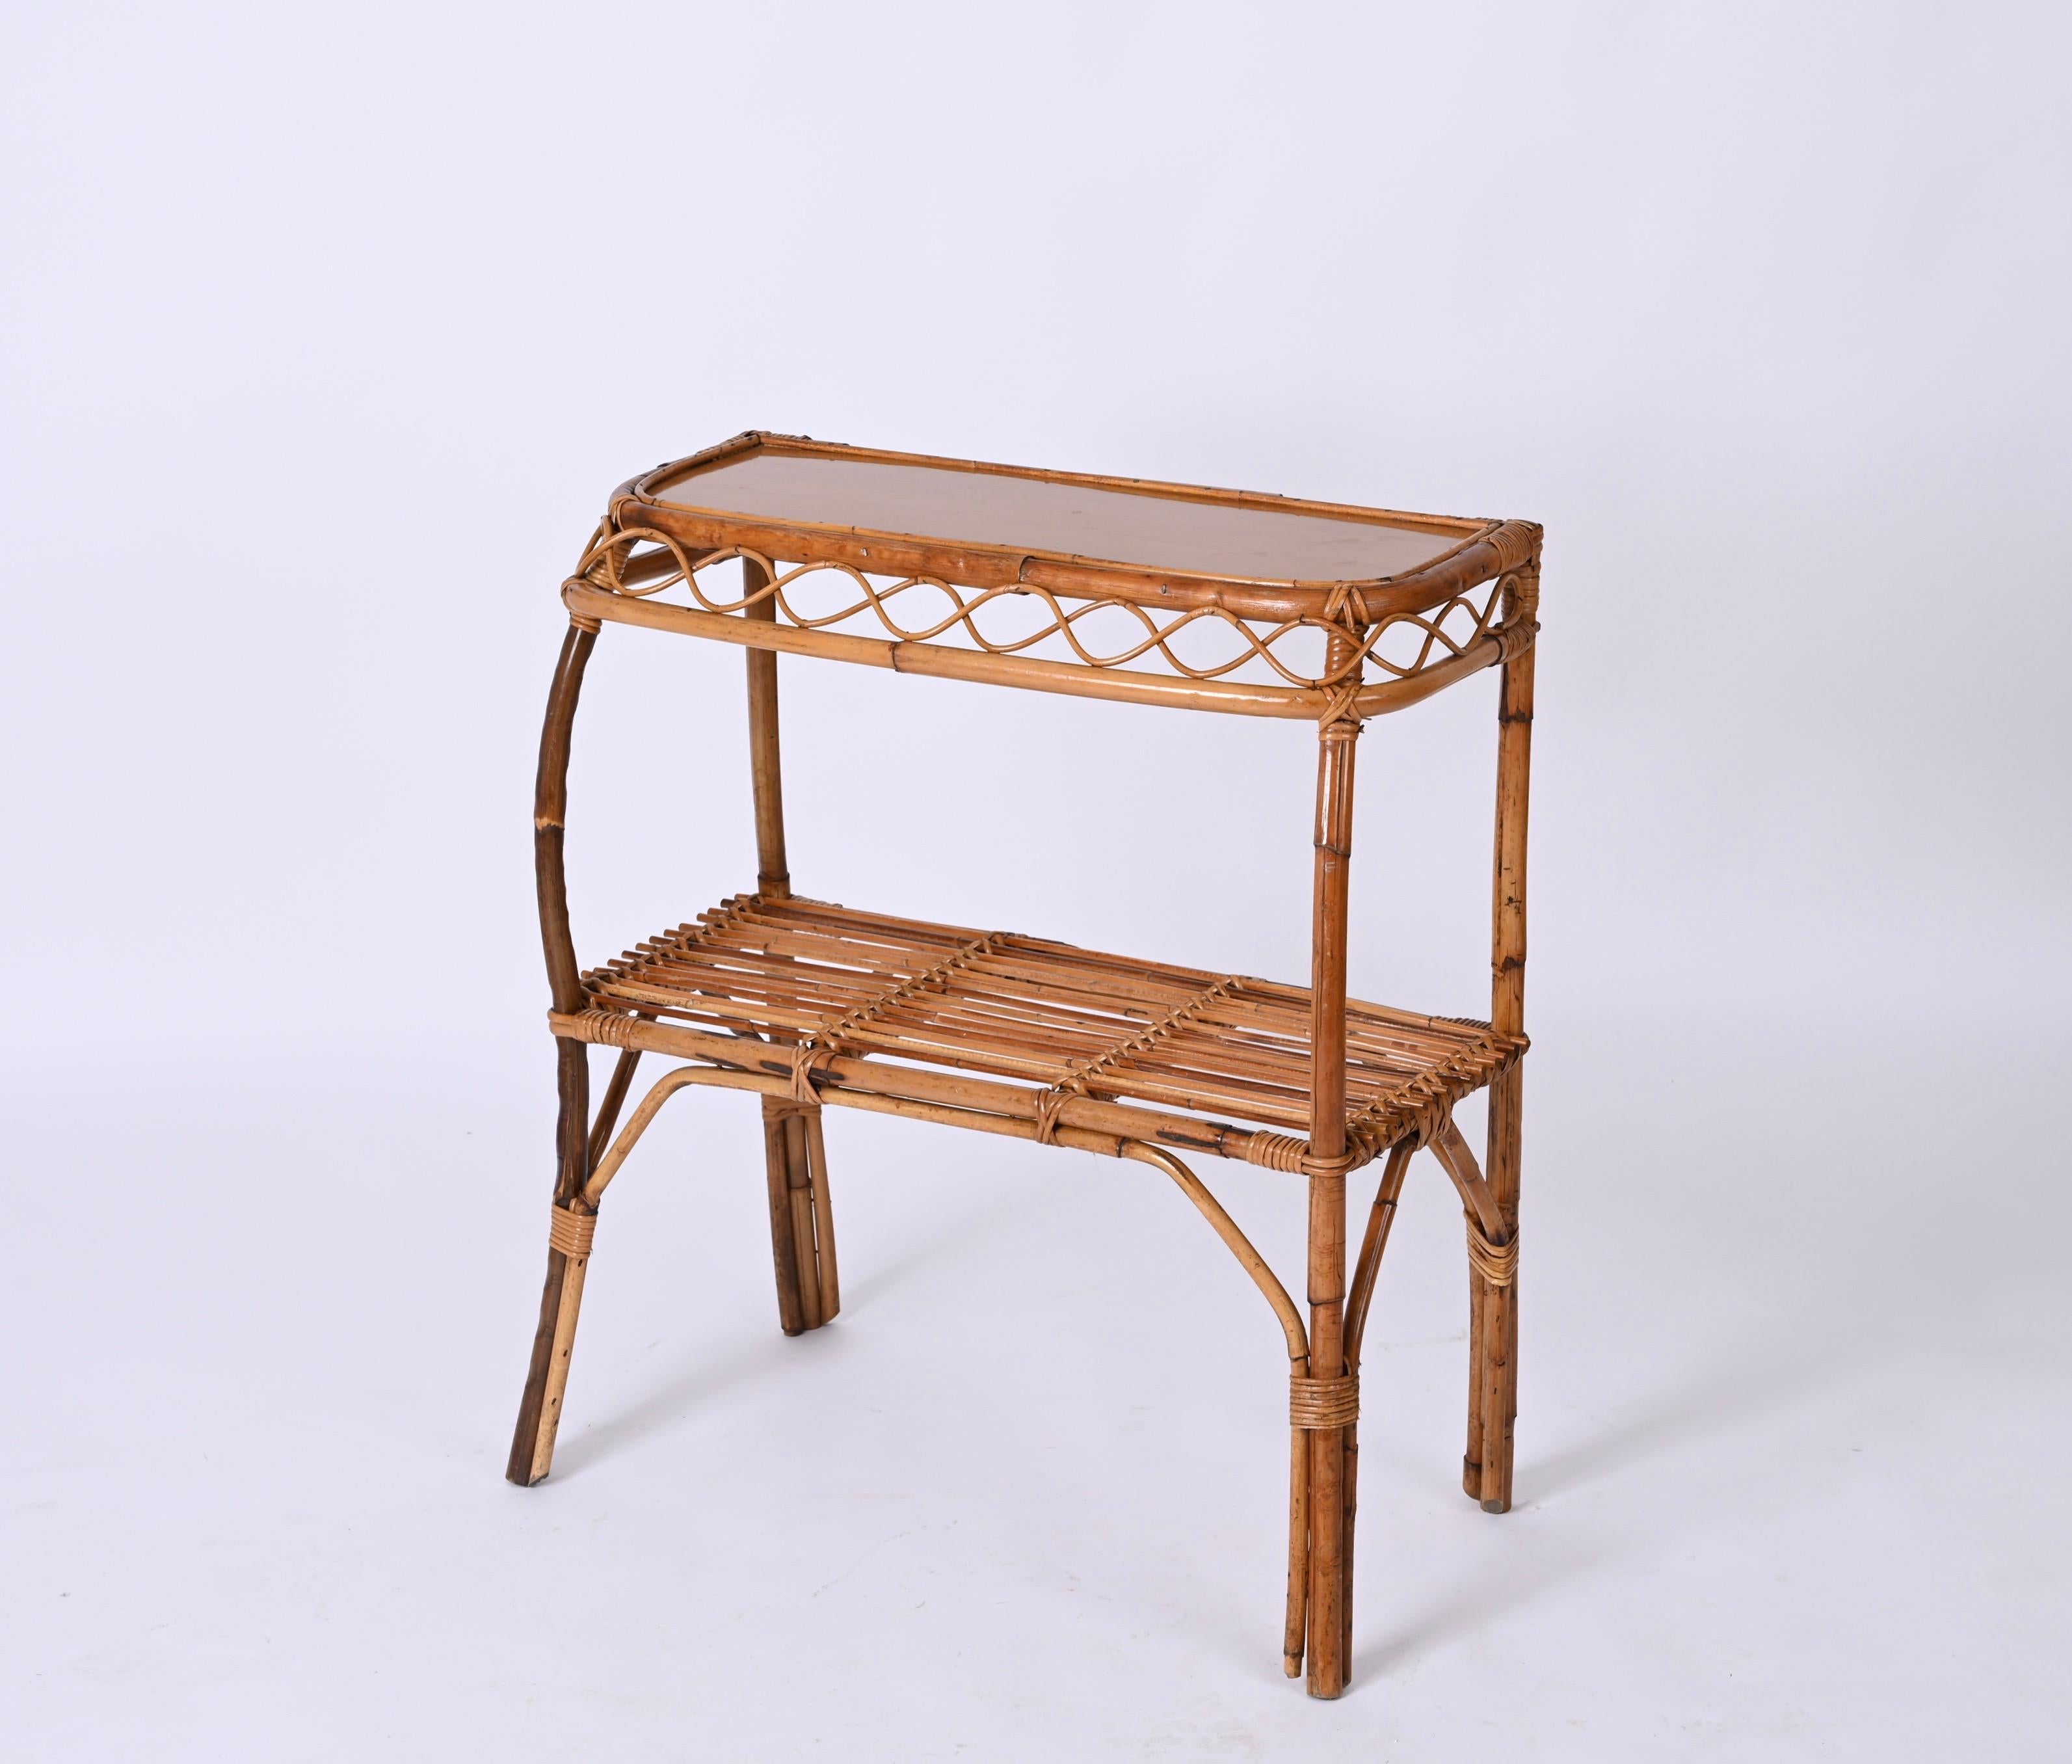 Italian Midcentury Bamboo and Rattan Cocktail Console Table after Franco Albini, 1960s For Sale